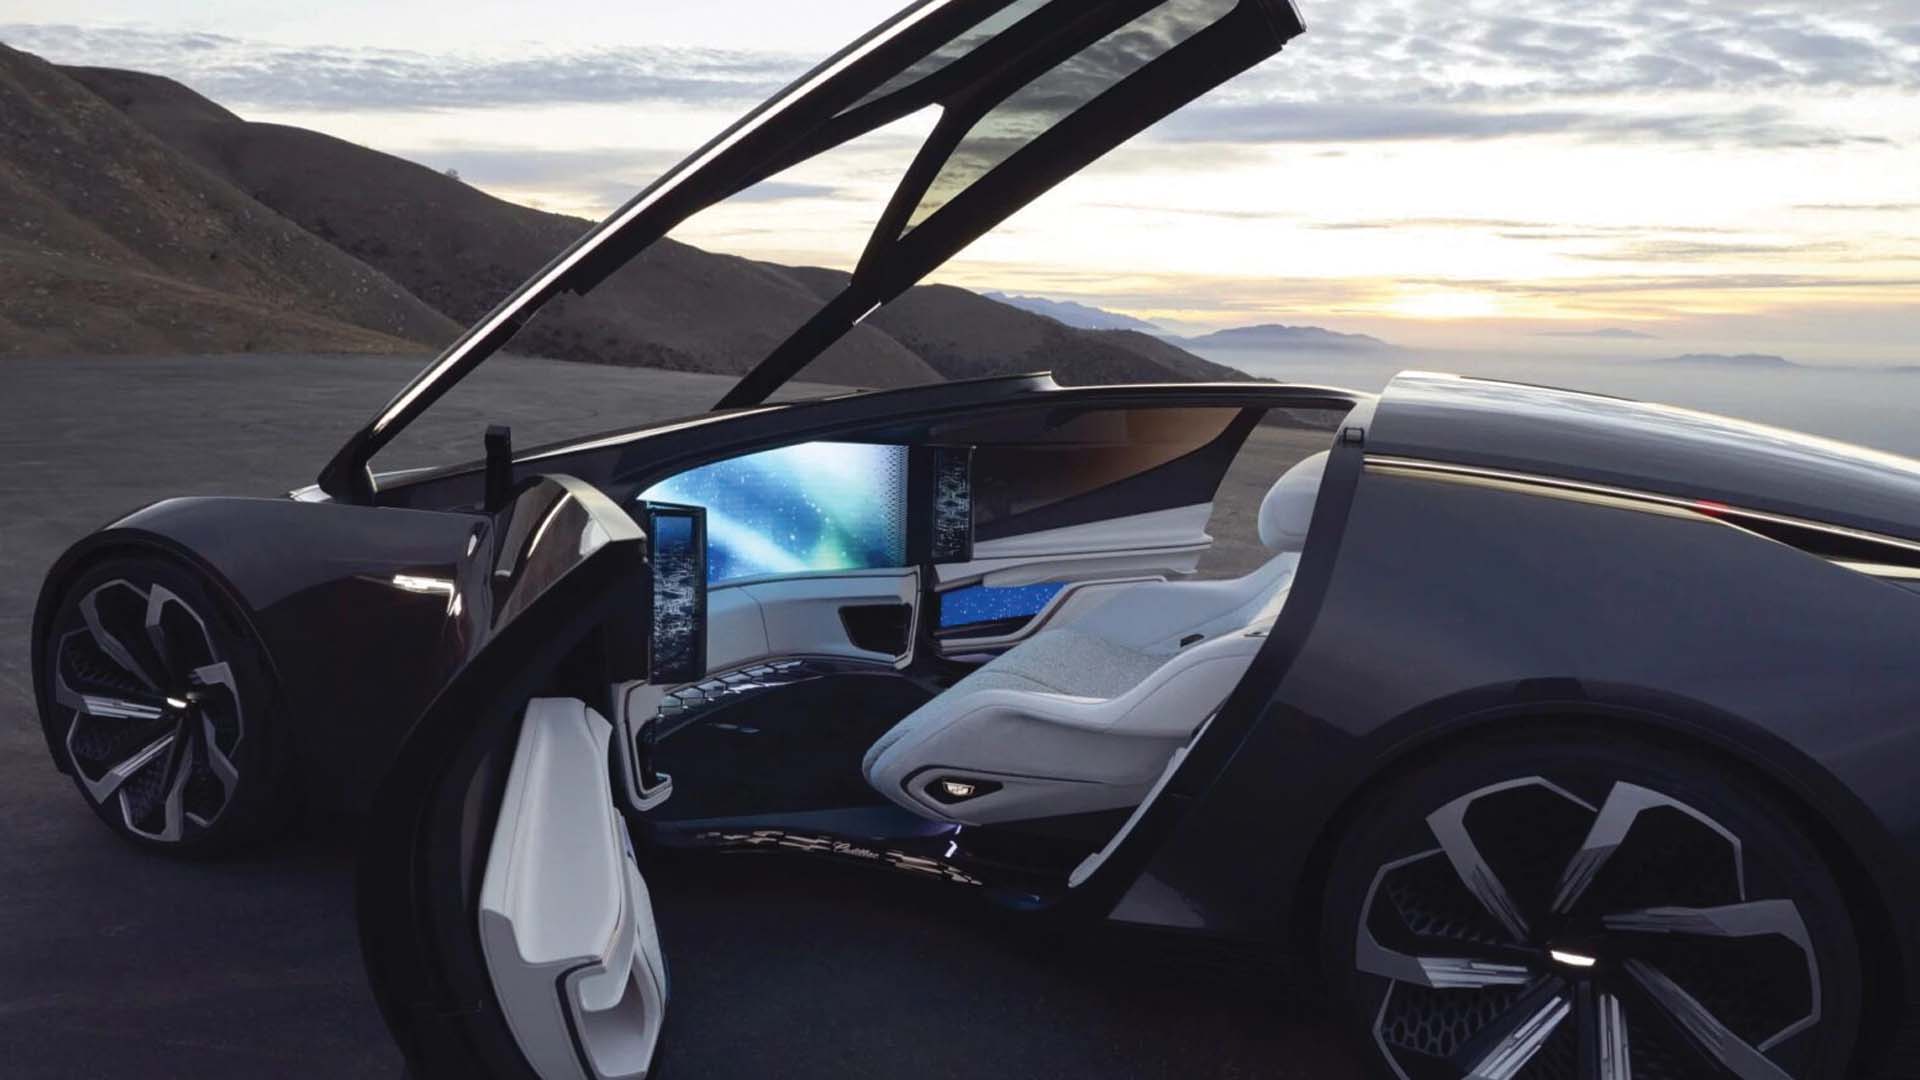 Cadillac's InnerSpace Concept, technology outlook 2022